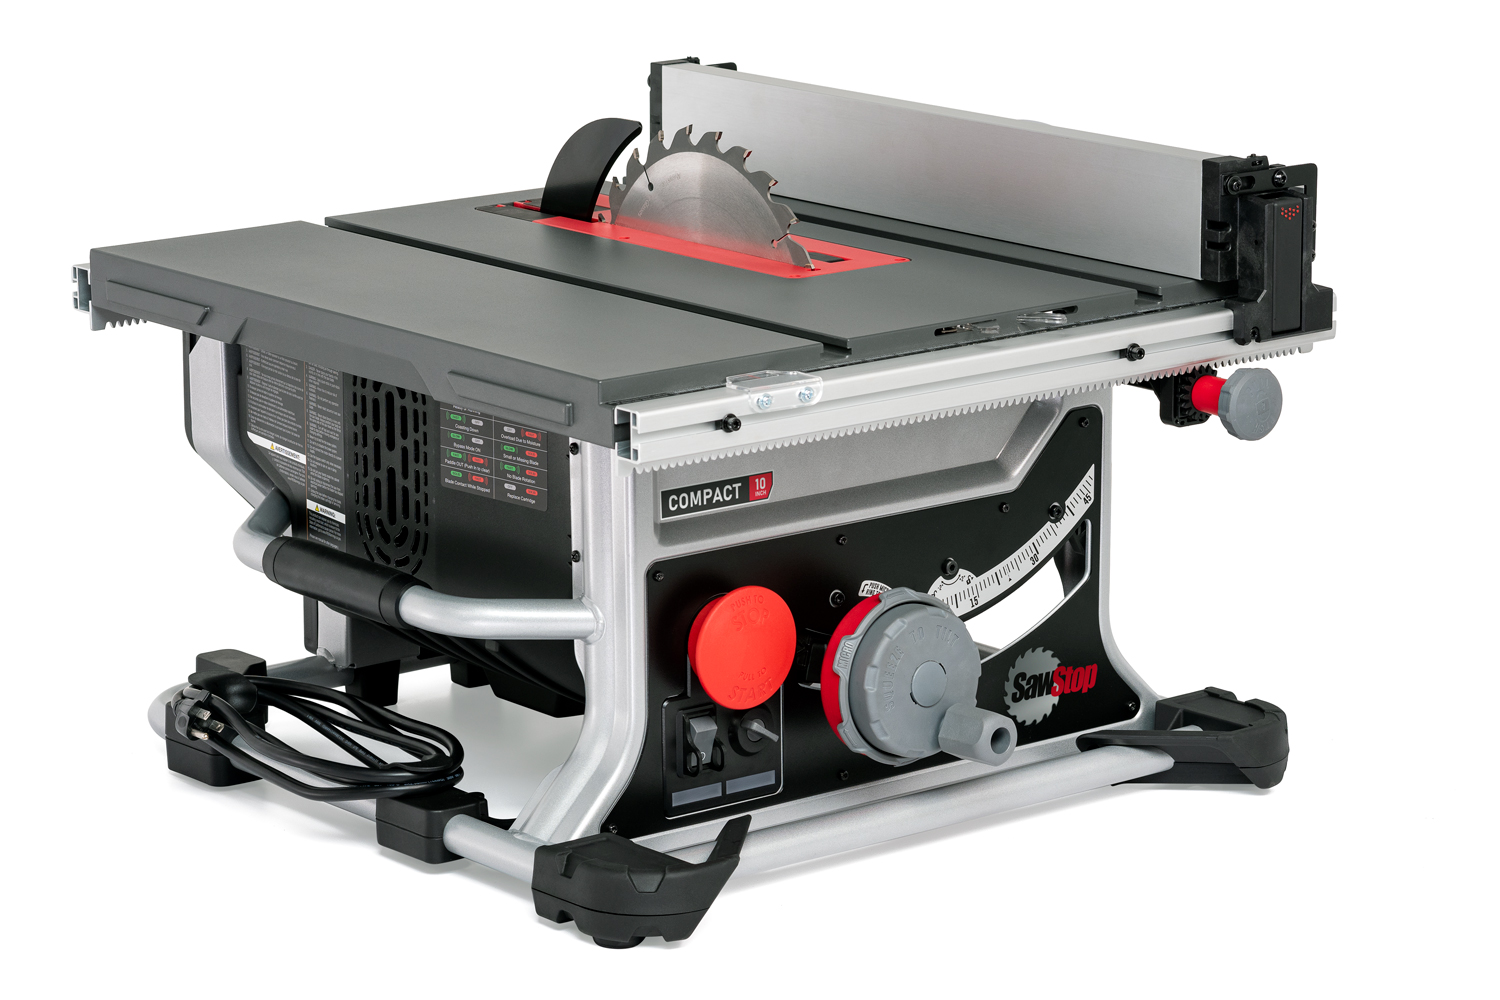 Sawstop CTS-tm Compact Table Saw Image